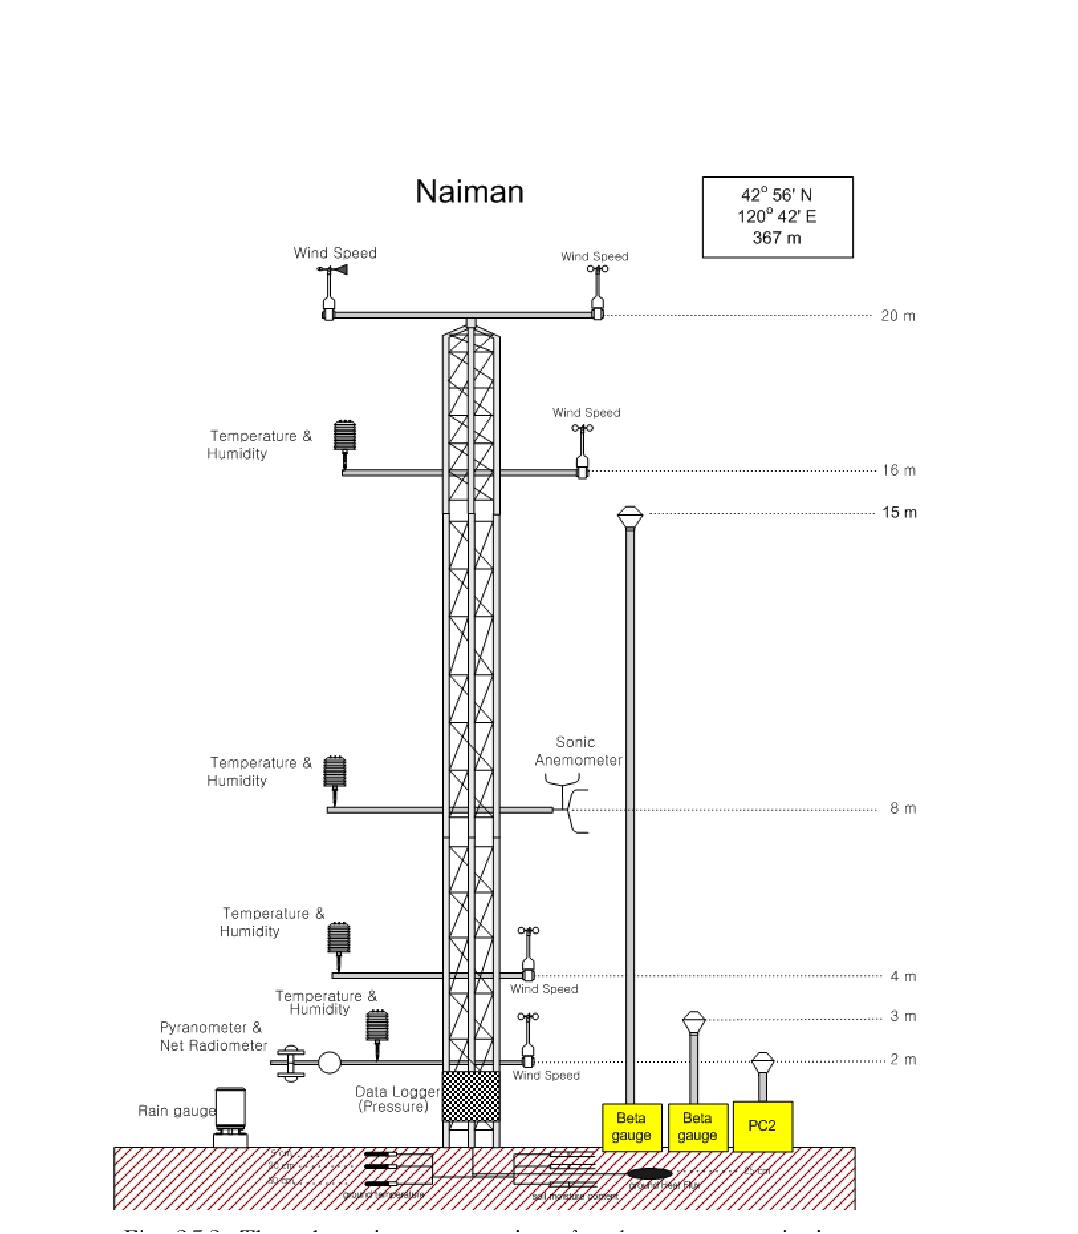 The schematic representation of a dust storm monitoring tower at the Naiman site.